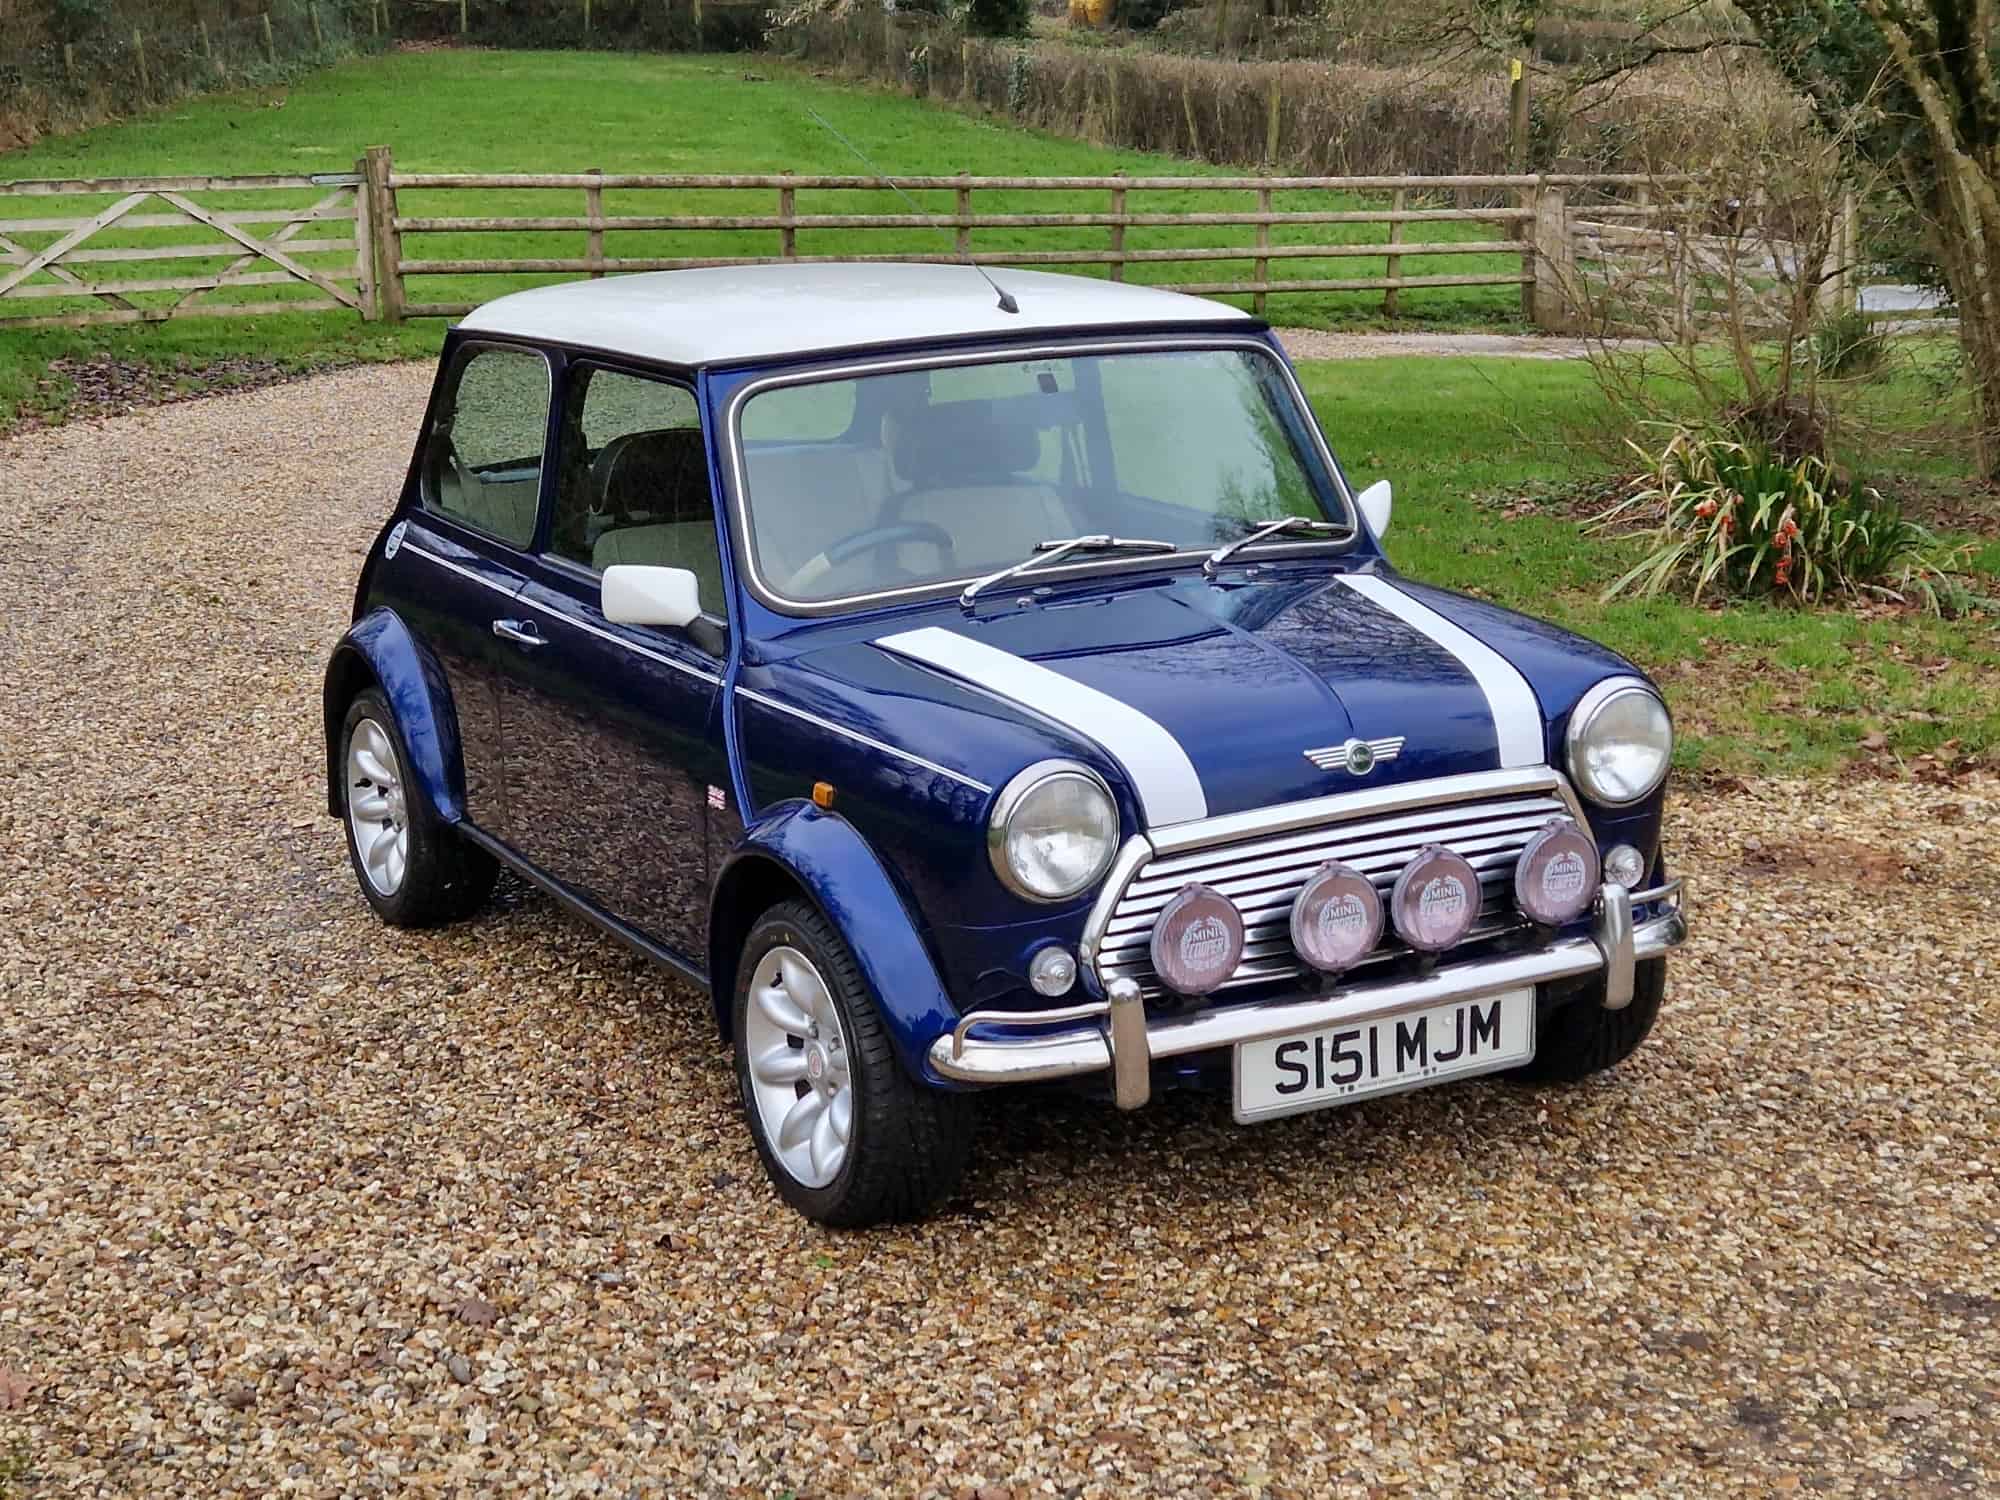 ** NOW SOLD ** 1998 Mini Cooper Sport On 36860 Miles By Its Last Owner Of 26 Years!